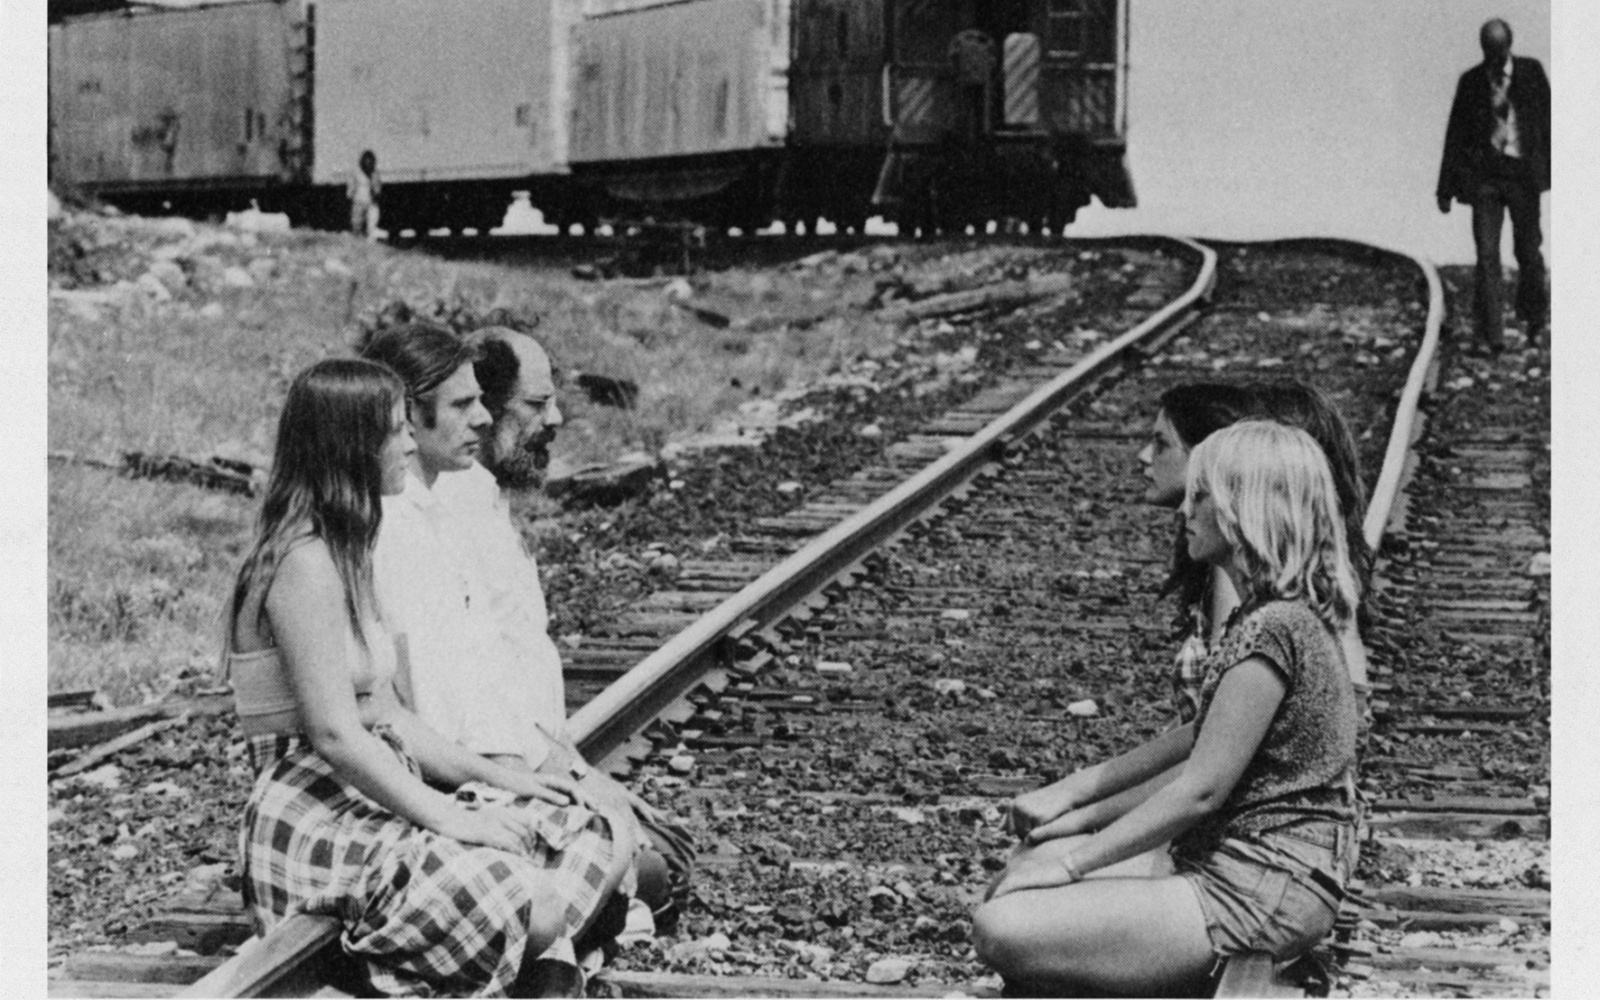 On a railroad track, people sit opposite. From behind a train is approaching.